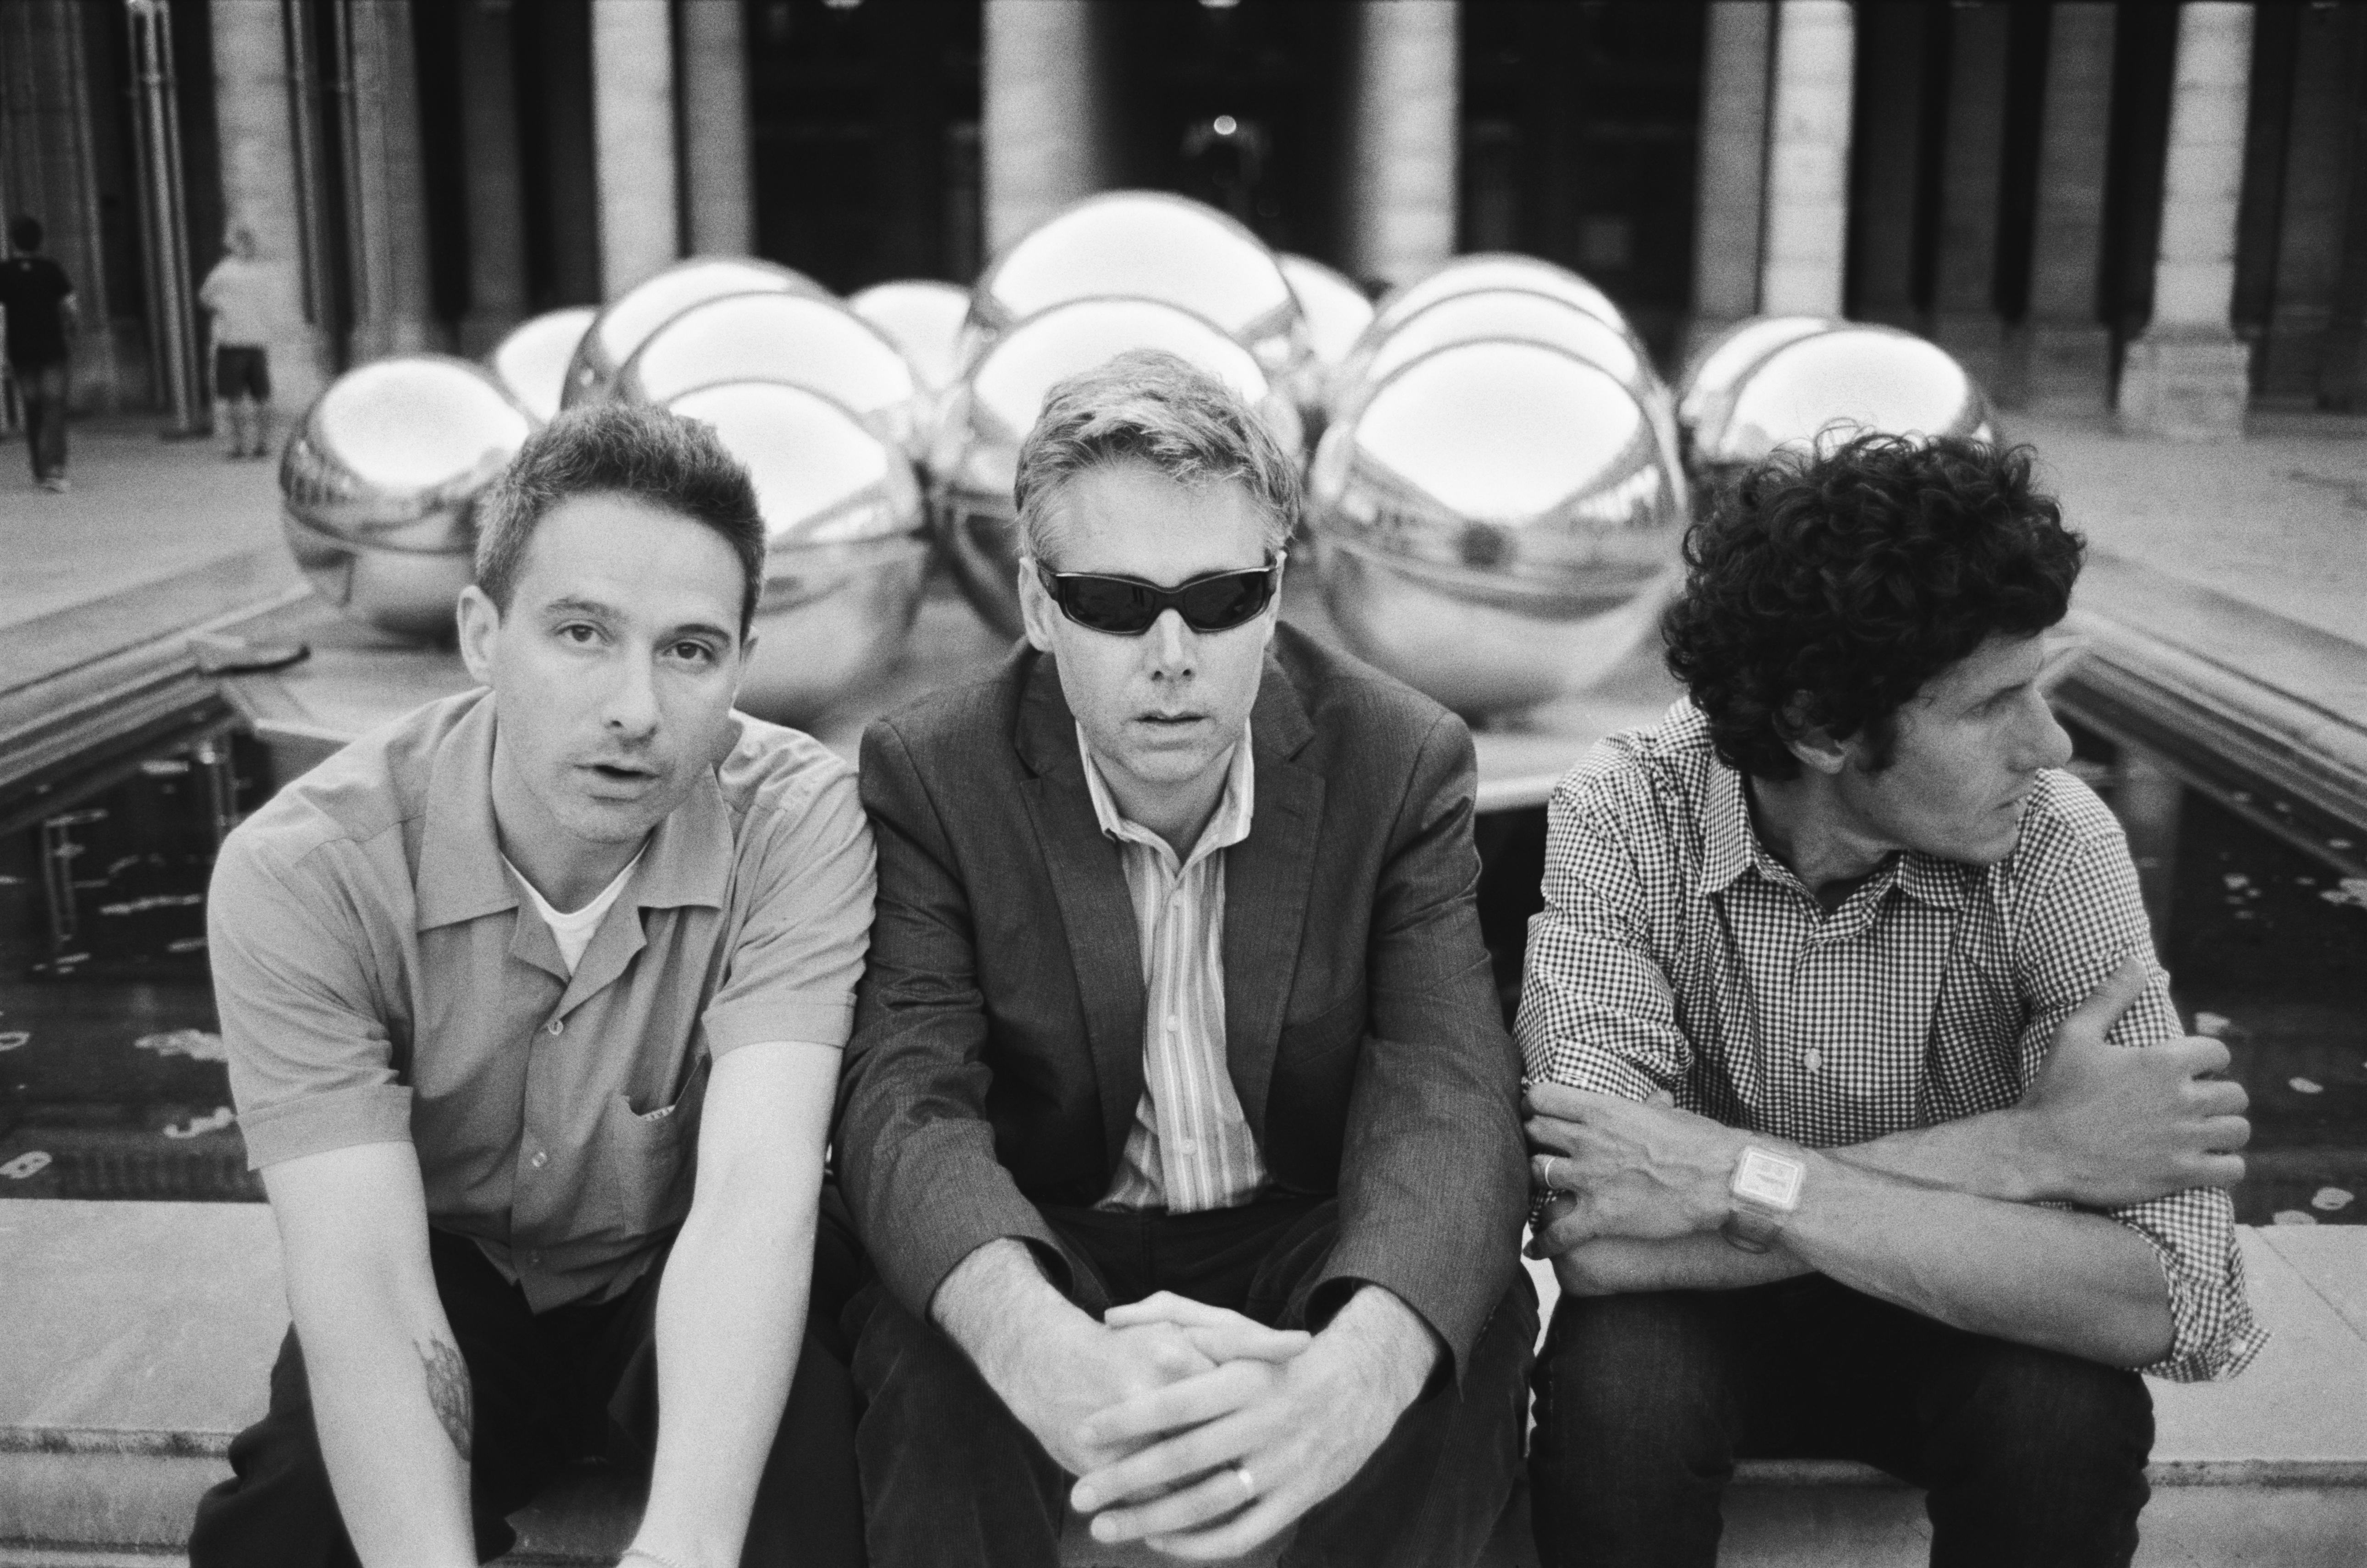 Amazon Releases Documentary On Beastie Boys' Ill Communication In Honor Of Album's 25th Anniversary